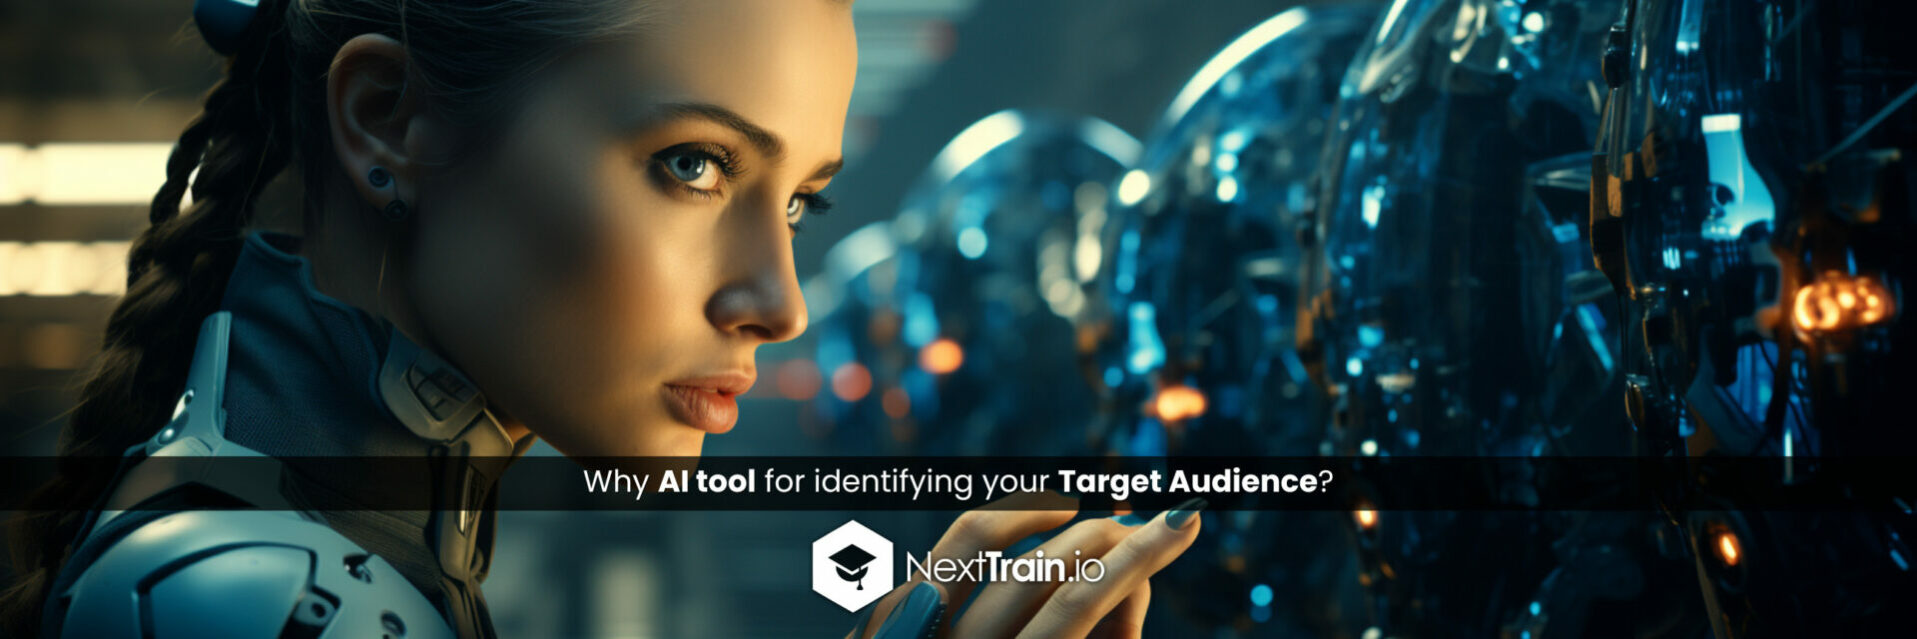 Why AI tool for identifying your Target Audience?